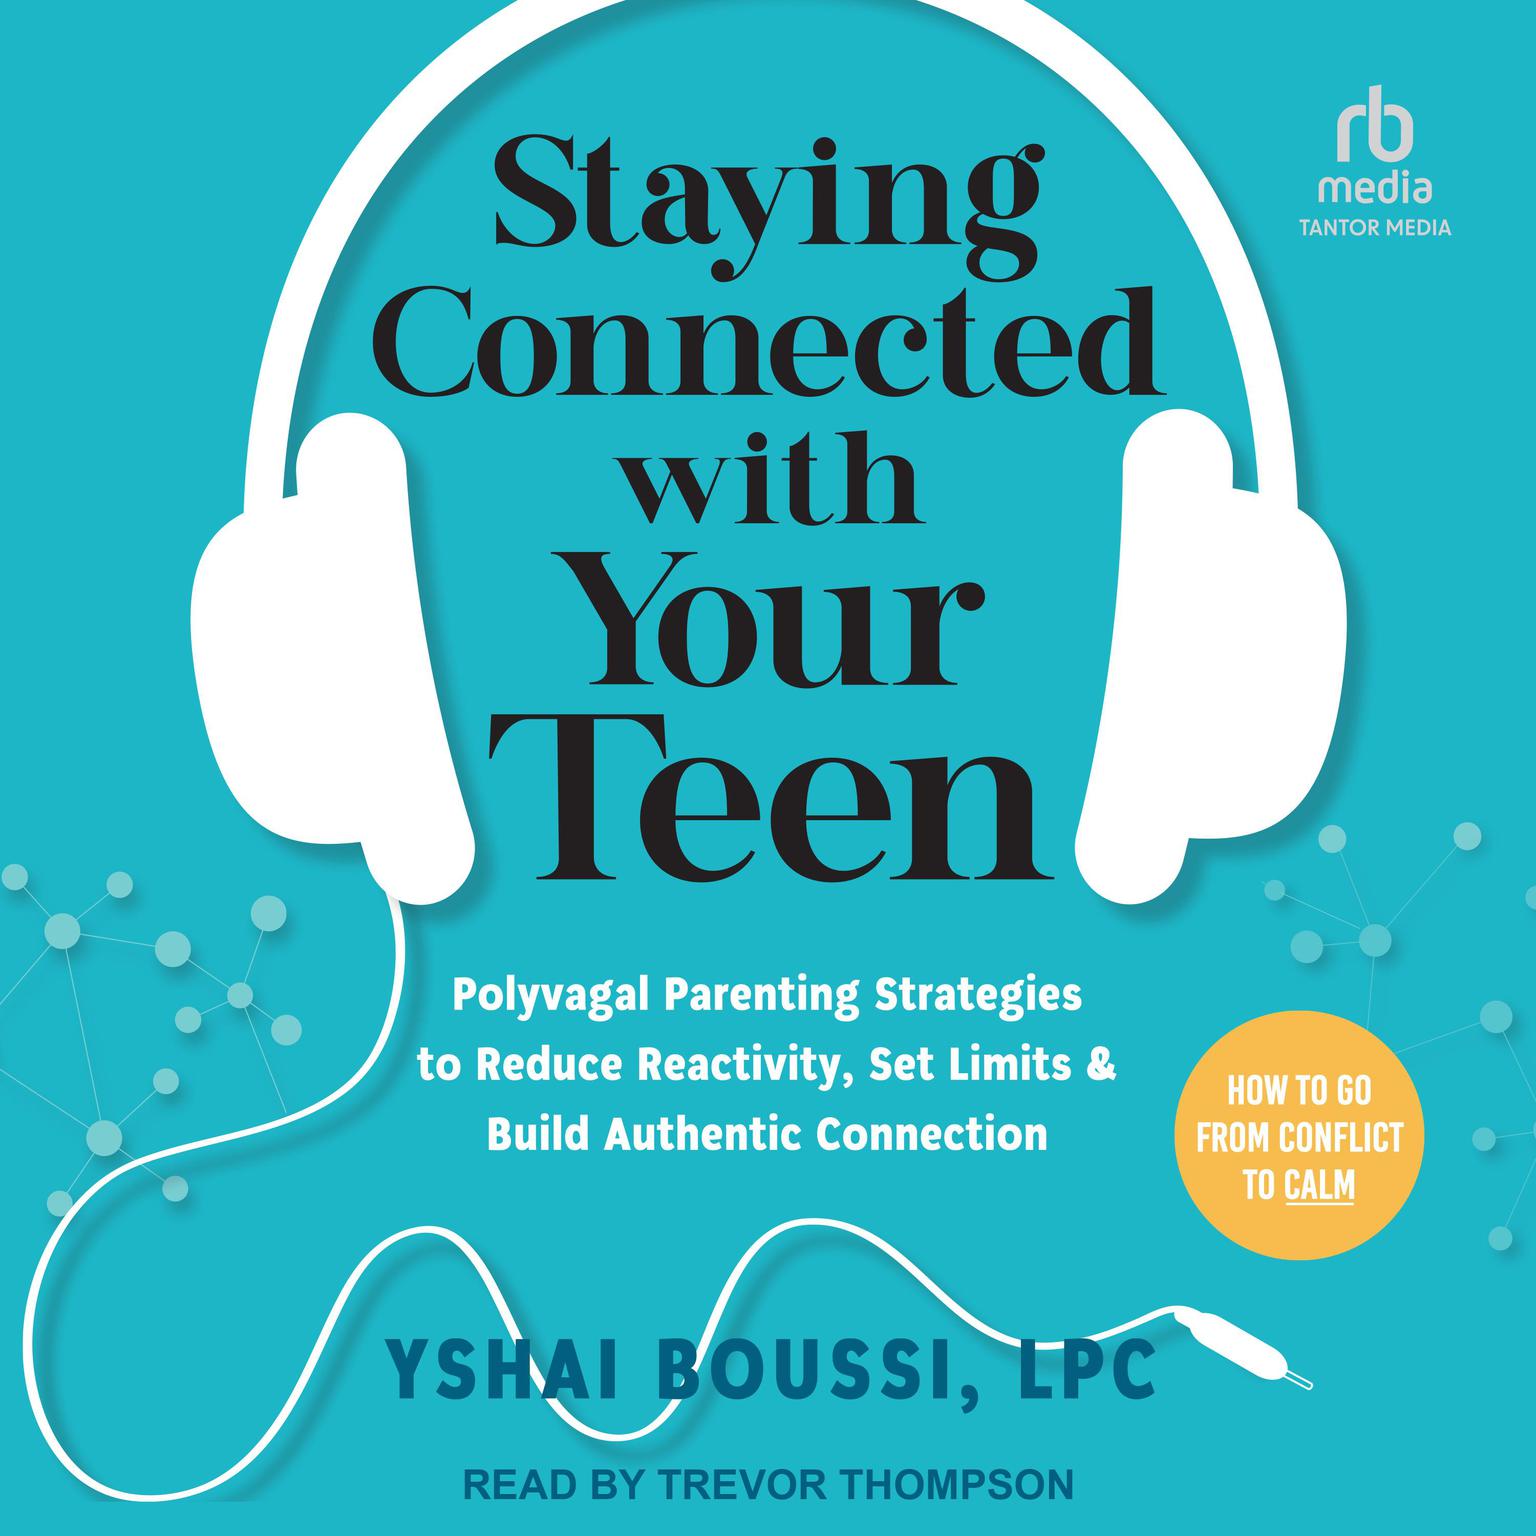 Staying Connected with Your Teen: Polyvagal Parenting Strategies to Reduce Reactivity, Set Limits, and Build Authentic Connection Audiobook, by Yshai Boussi, LPC